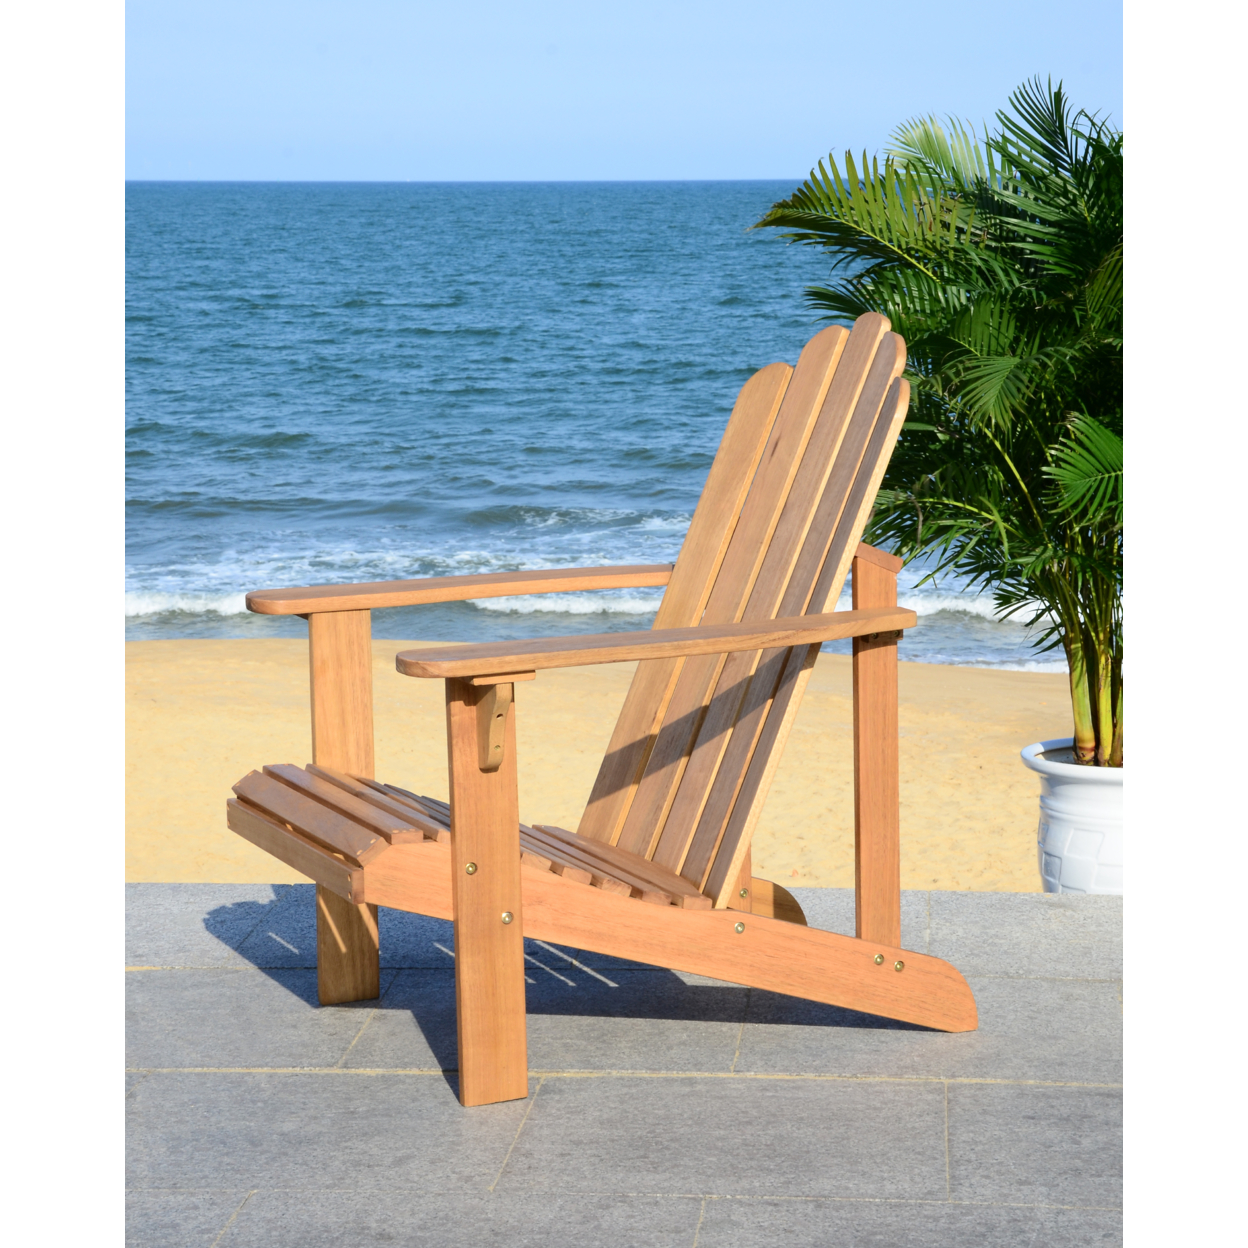 SAFAVIEH Outdoor Collection Topher Adirondack Chair Natural